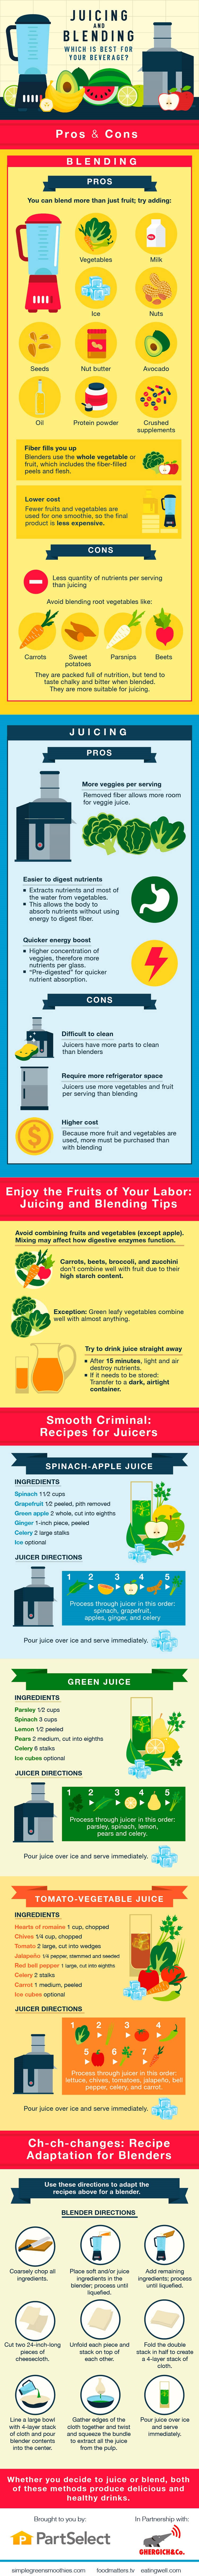 Benefits of Juicing and Blending - Infographic